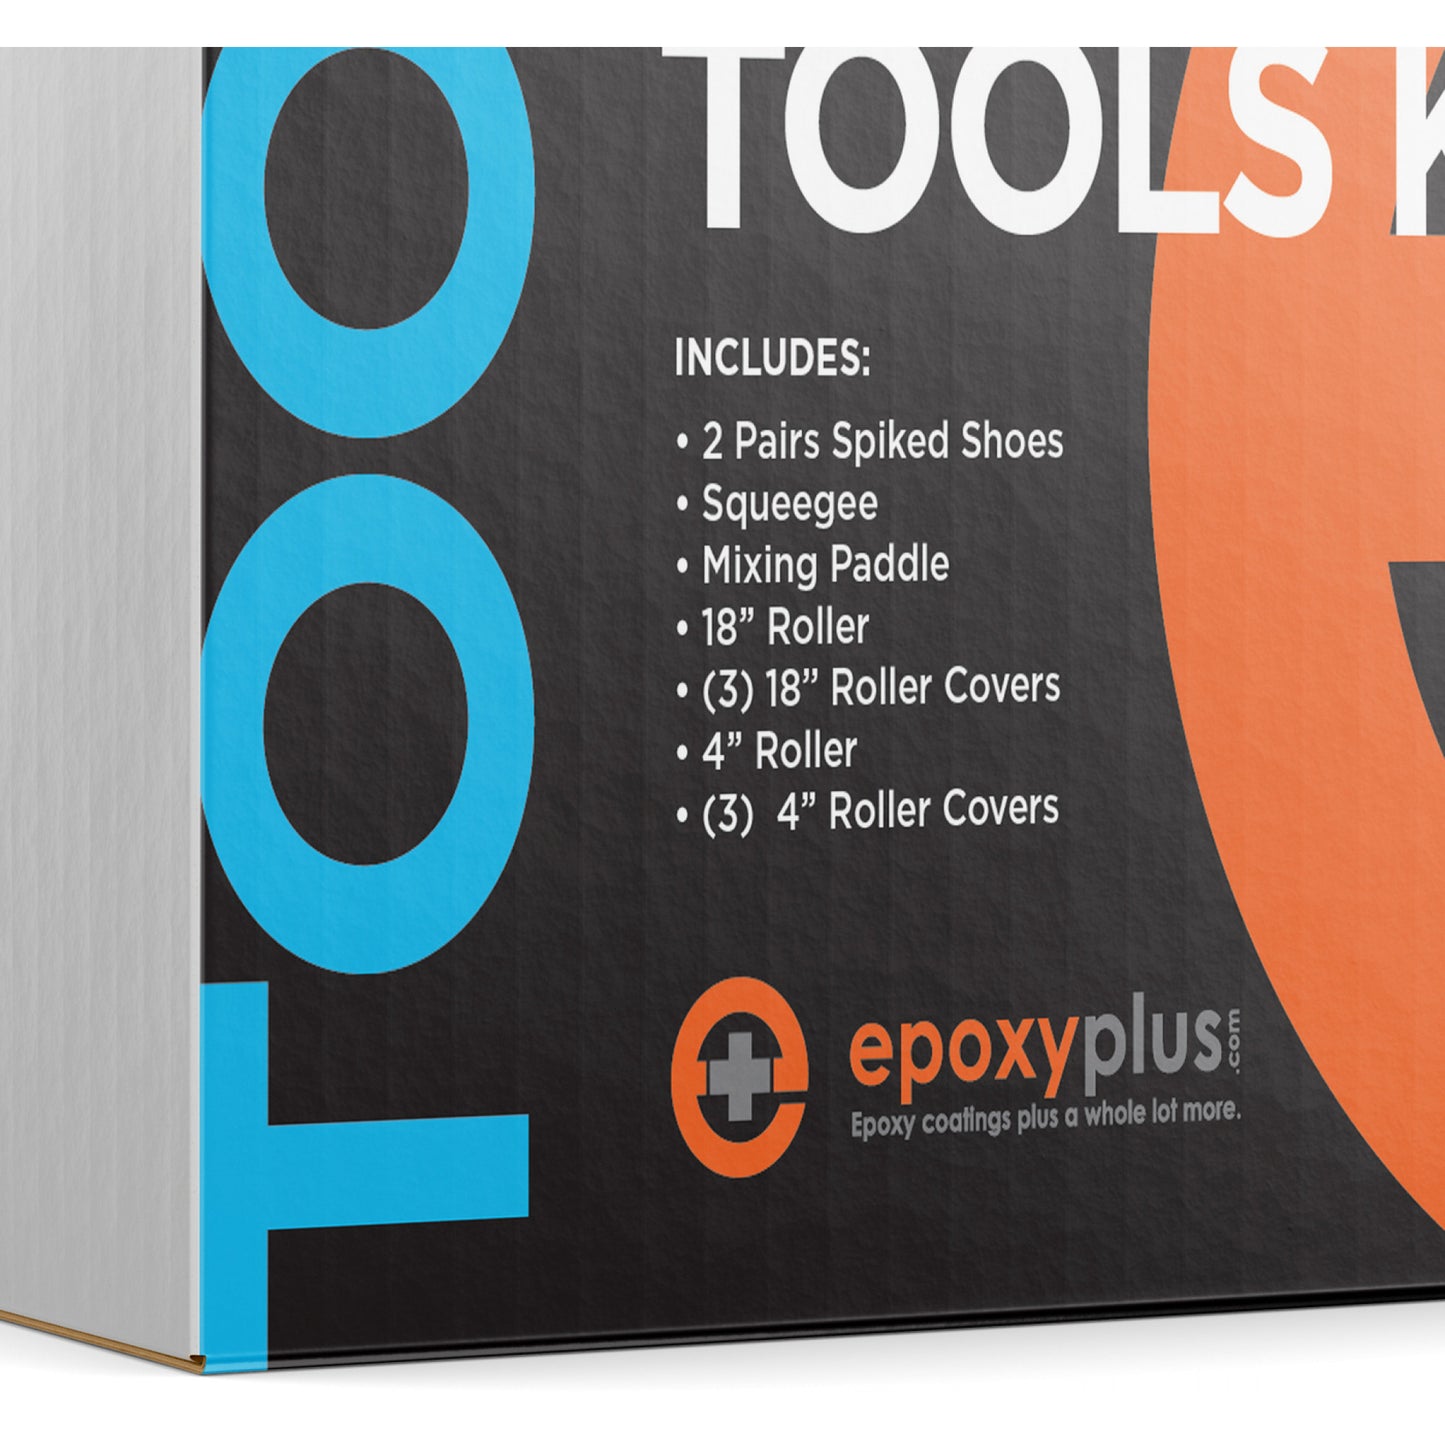 Essential Epoxy Tools: Everything you need in one box for a successful installation